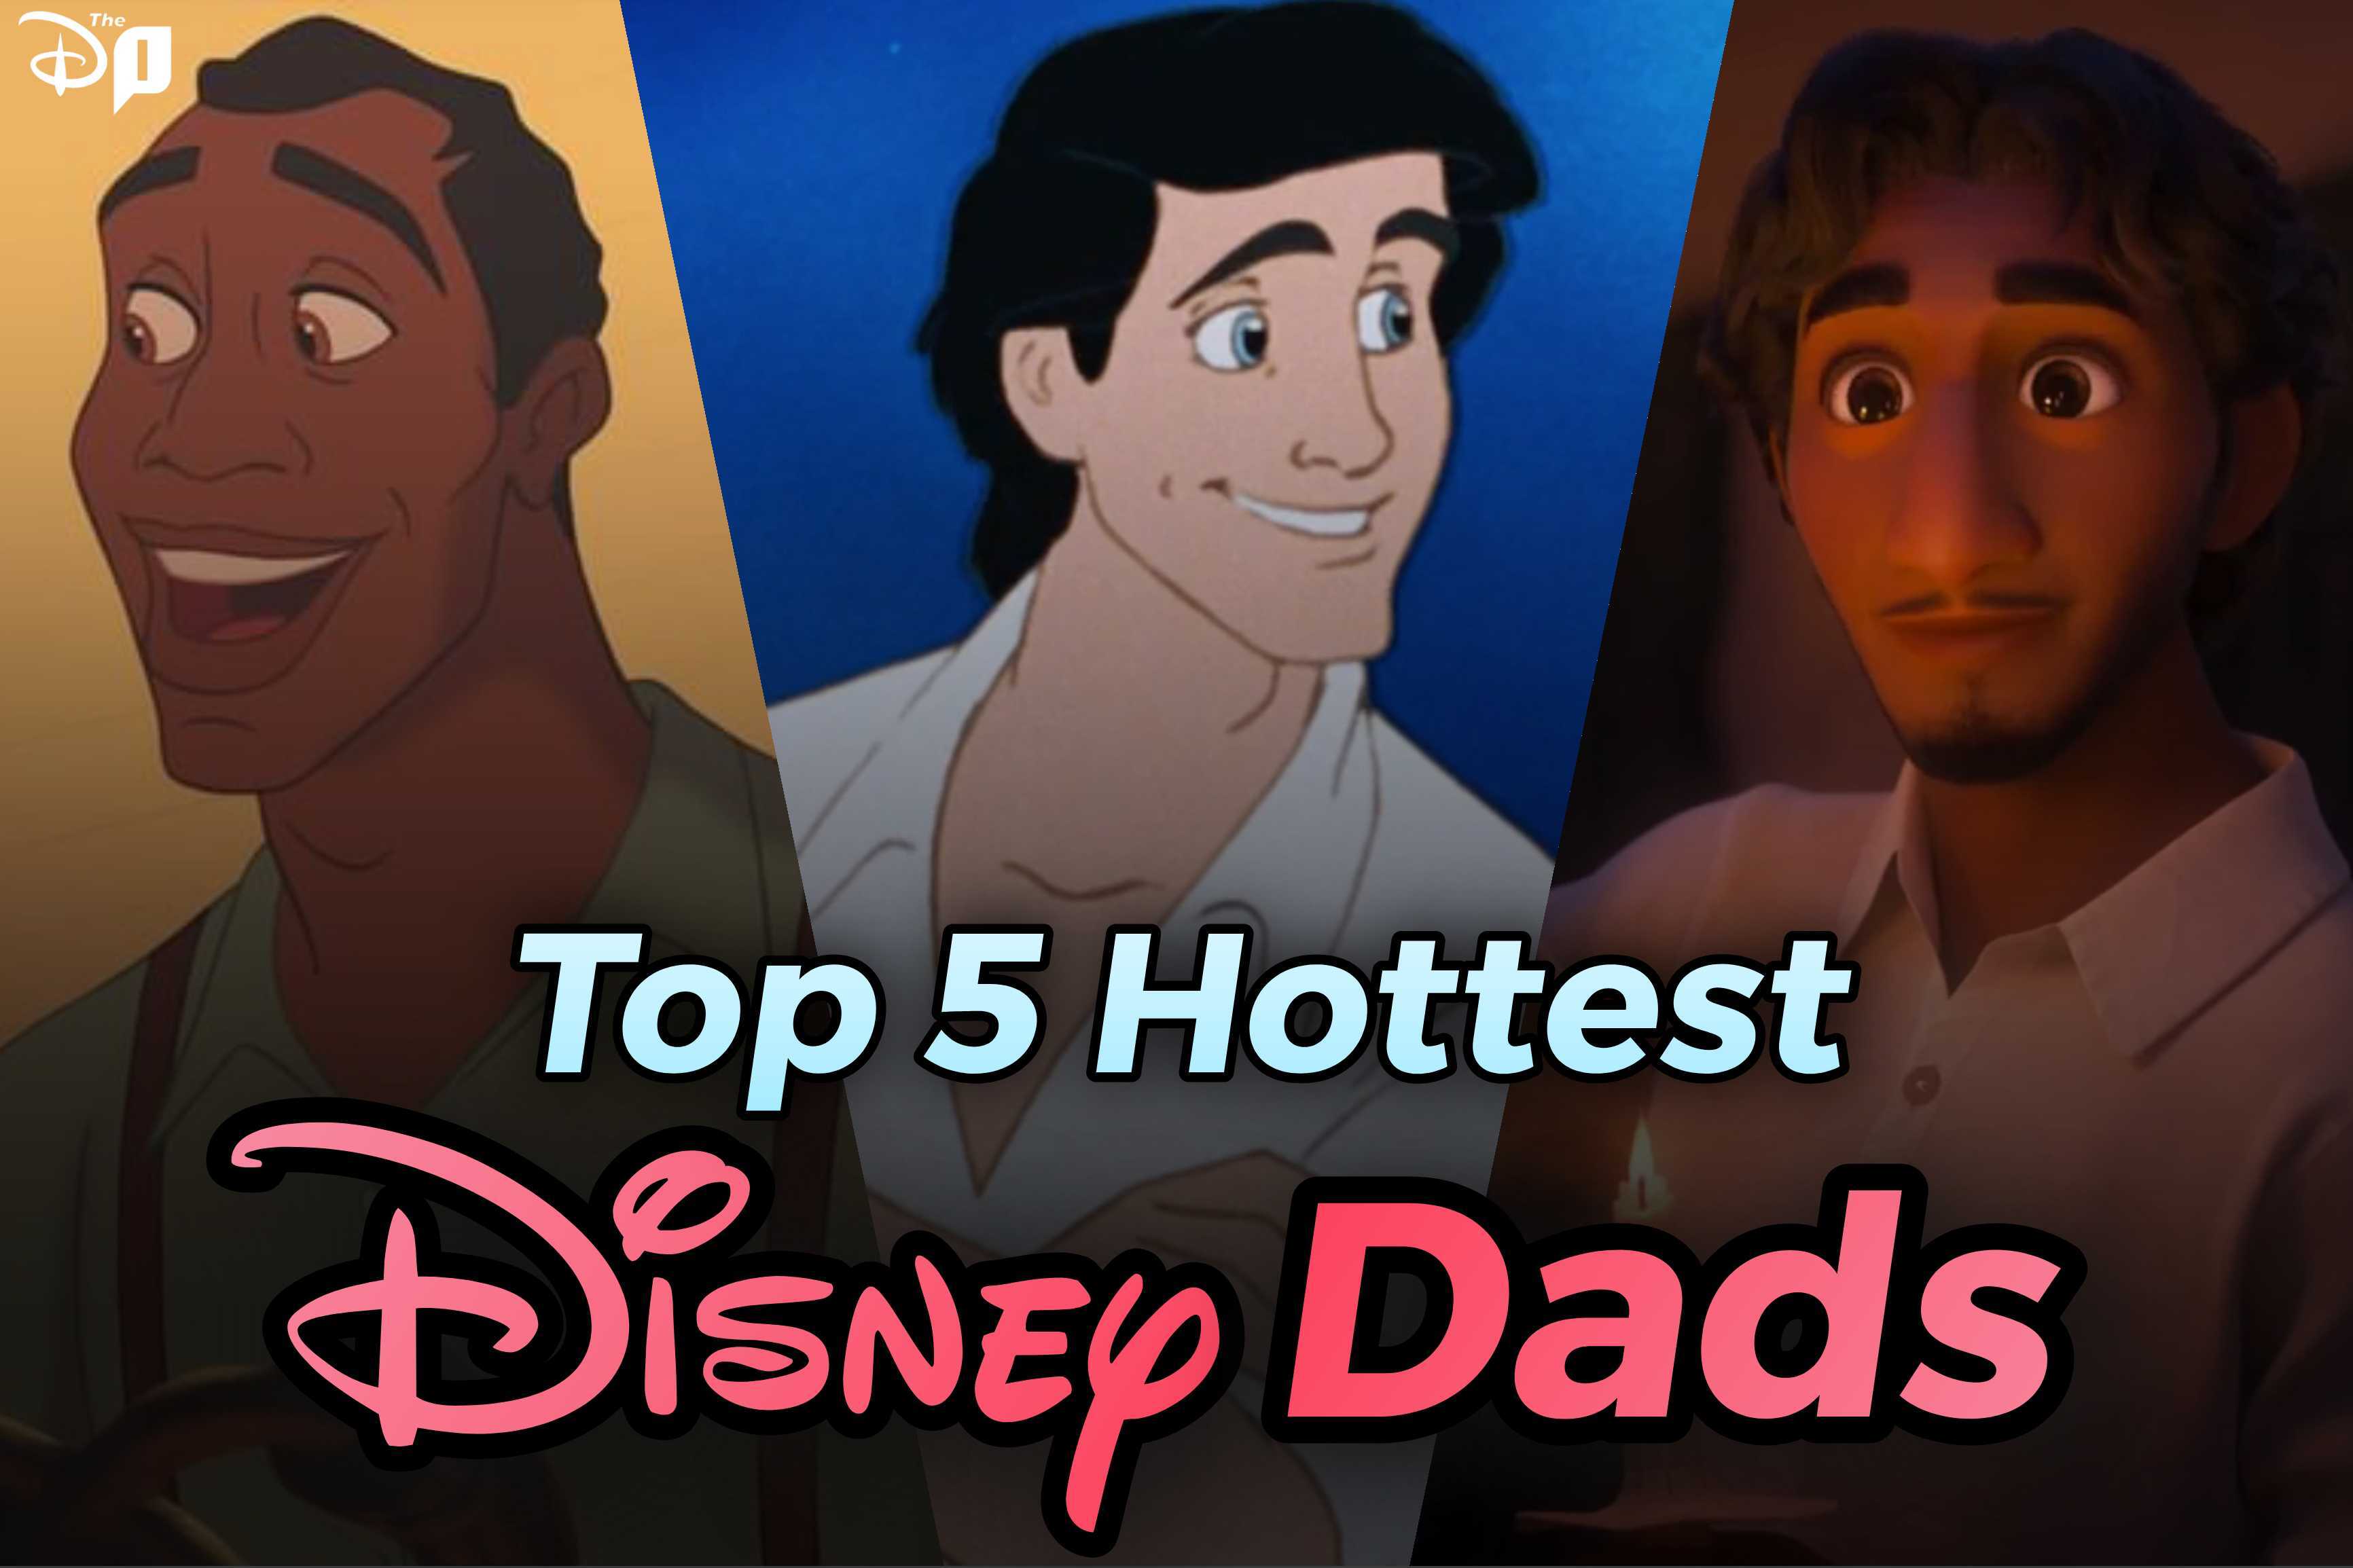 The 5 Hottest Disney Dads to Celebrate This Father’s Day